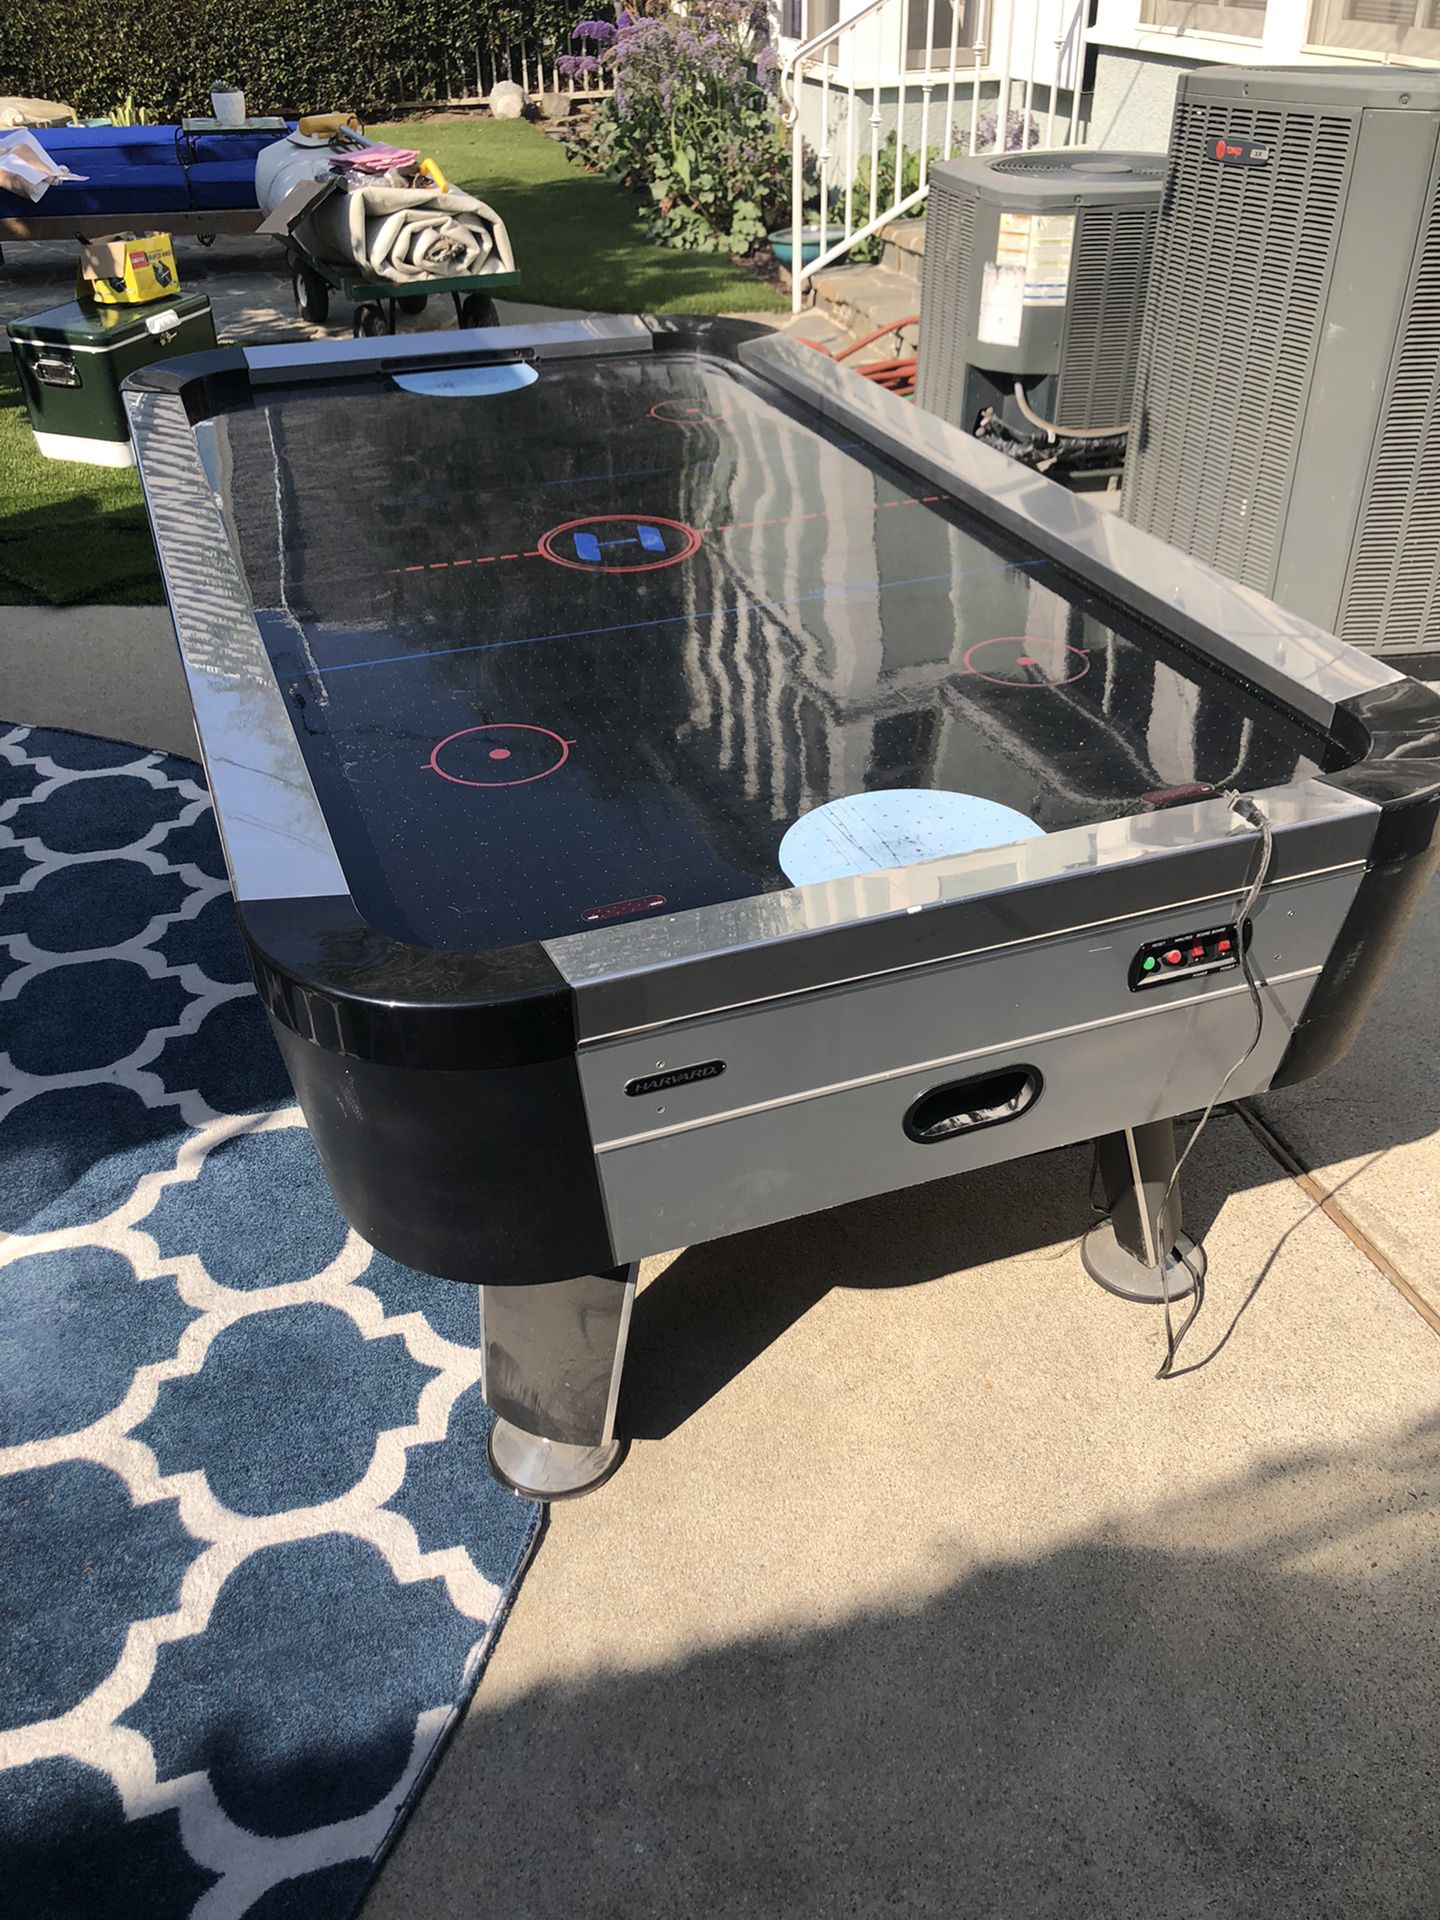 Awesome Air Hockey Table!